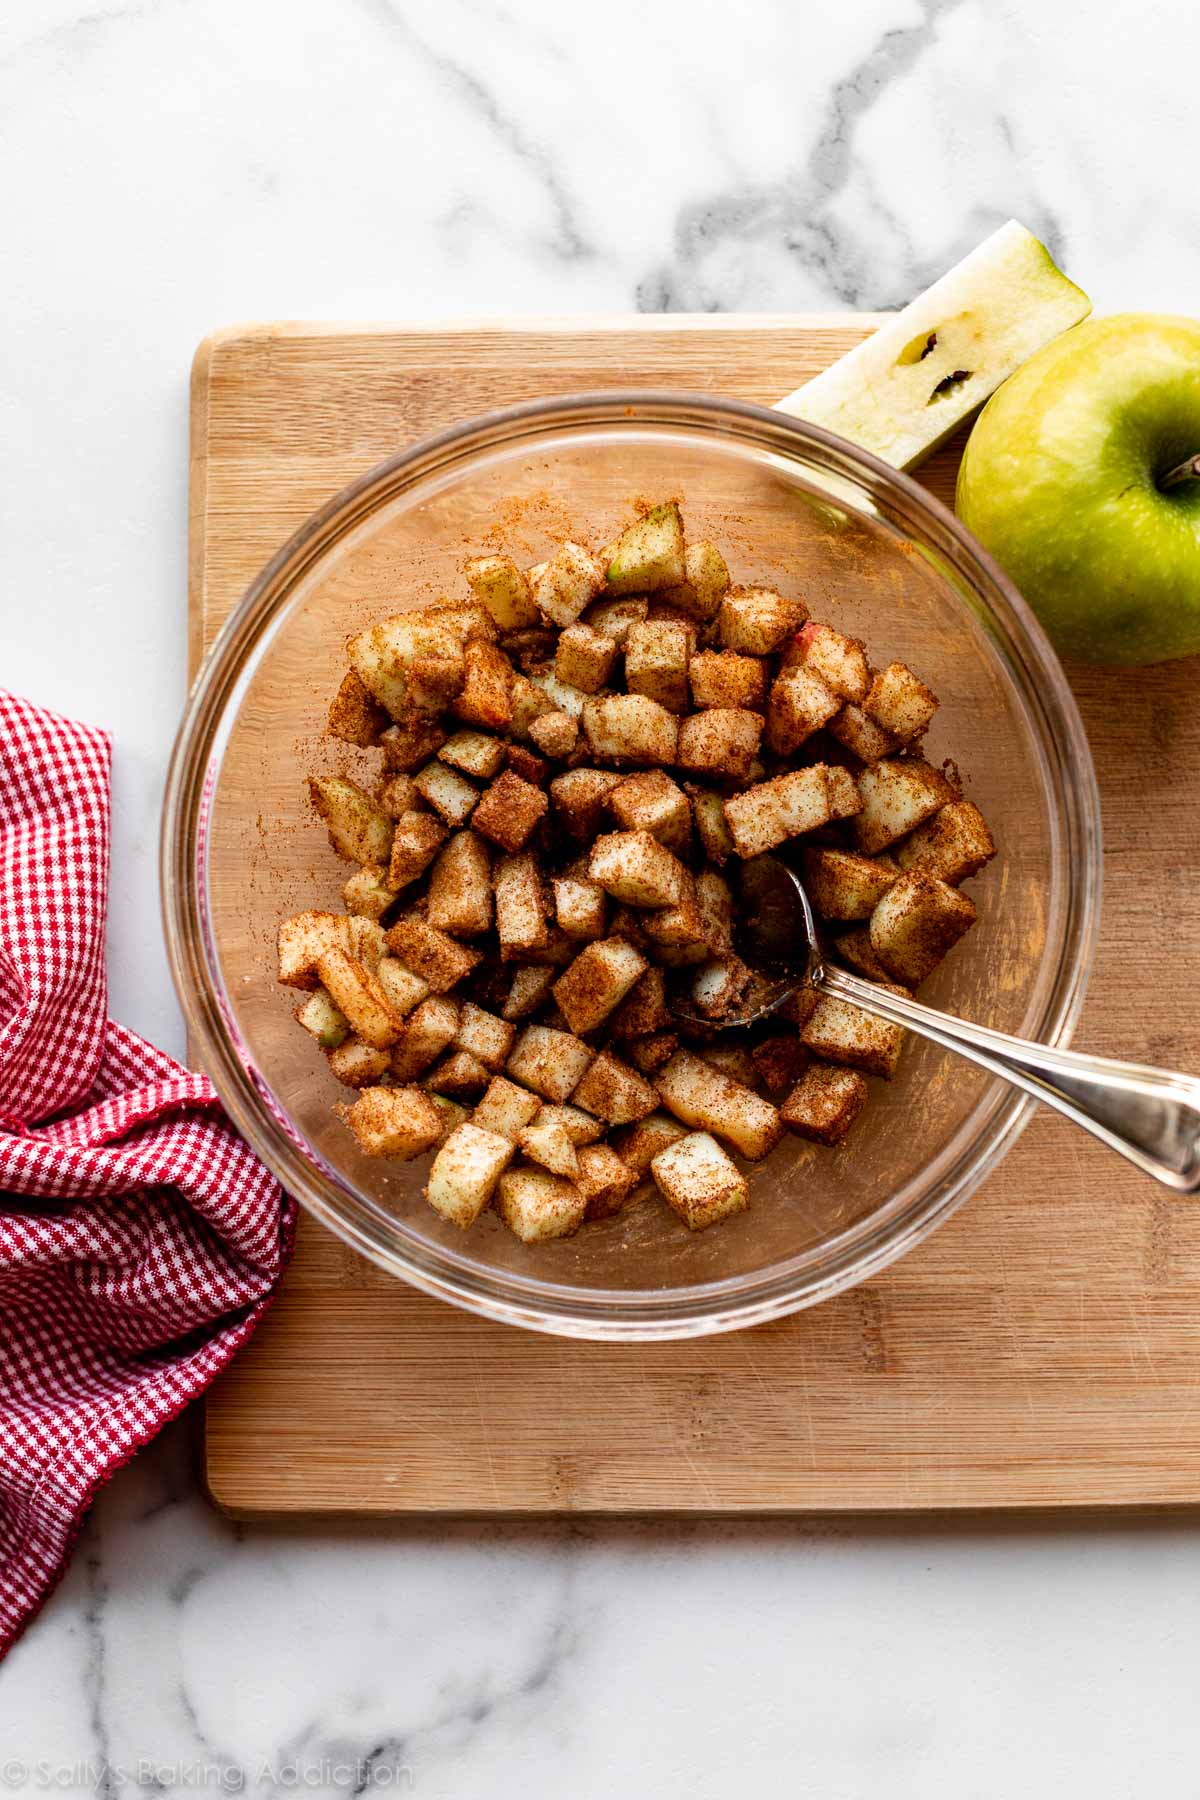 chopped apples tossed in brown sugar and cinnamon